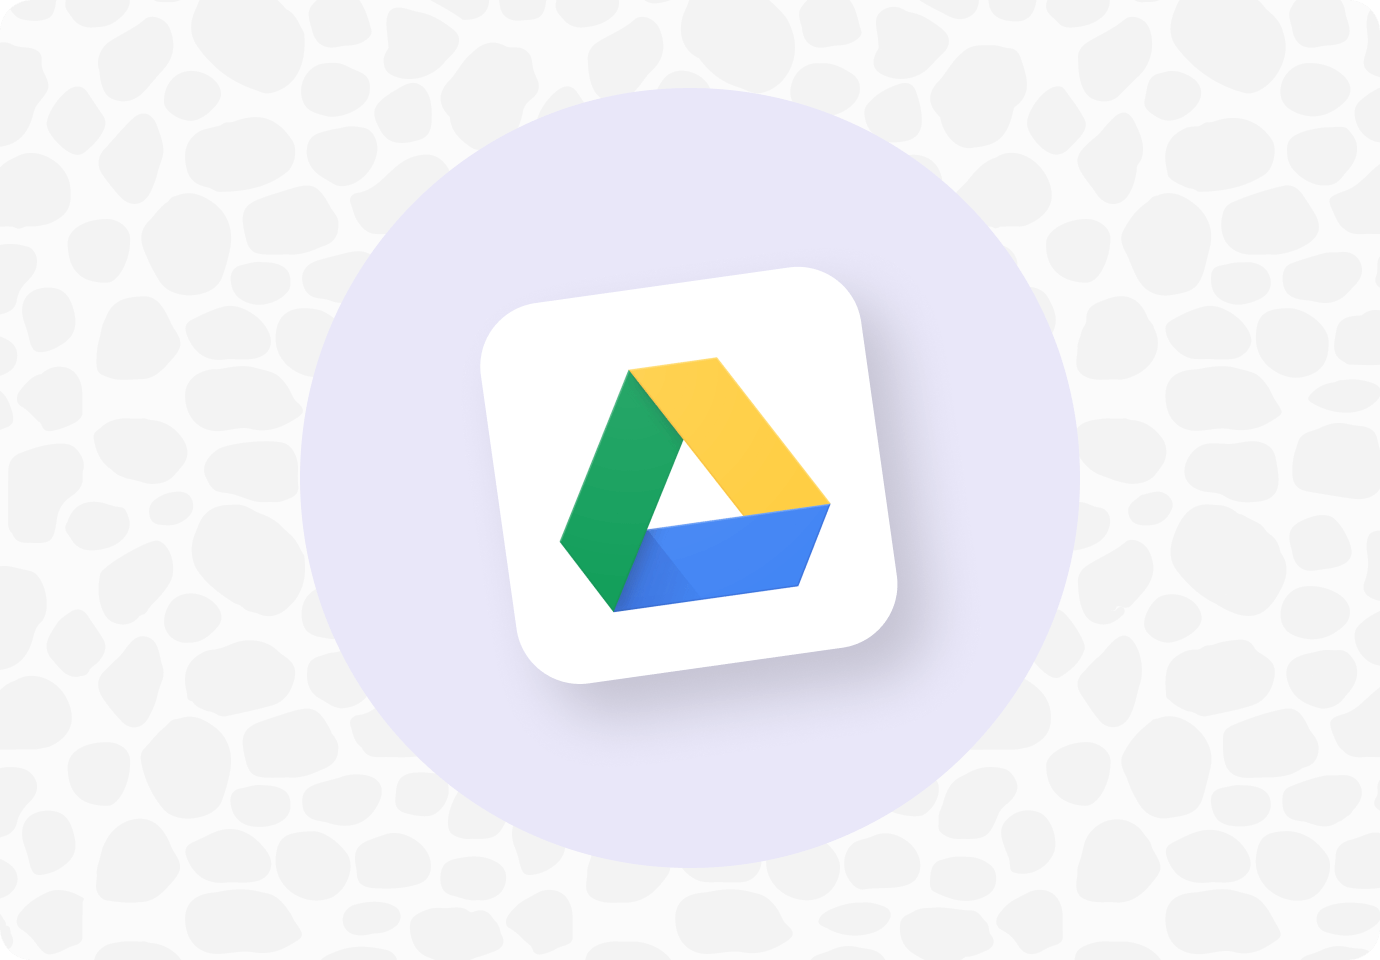 Connect Google Sheets and Geckoboard